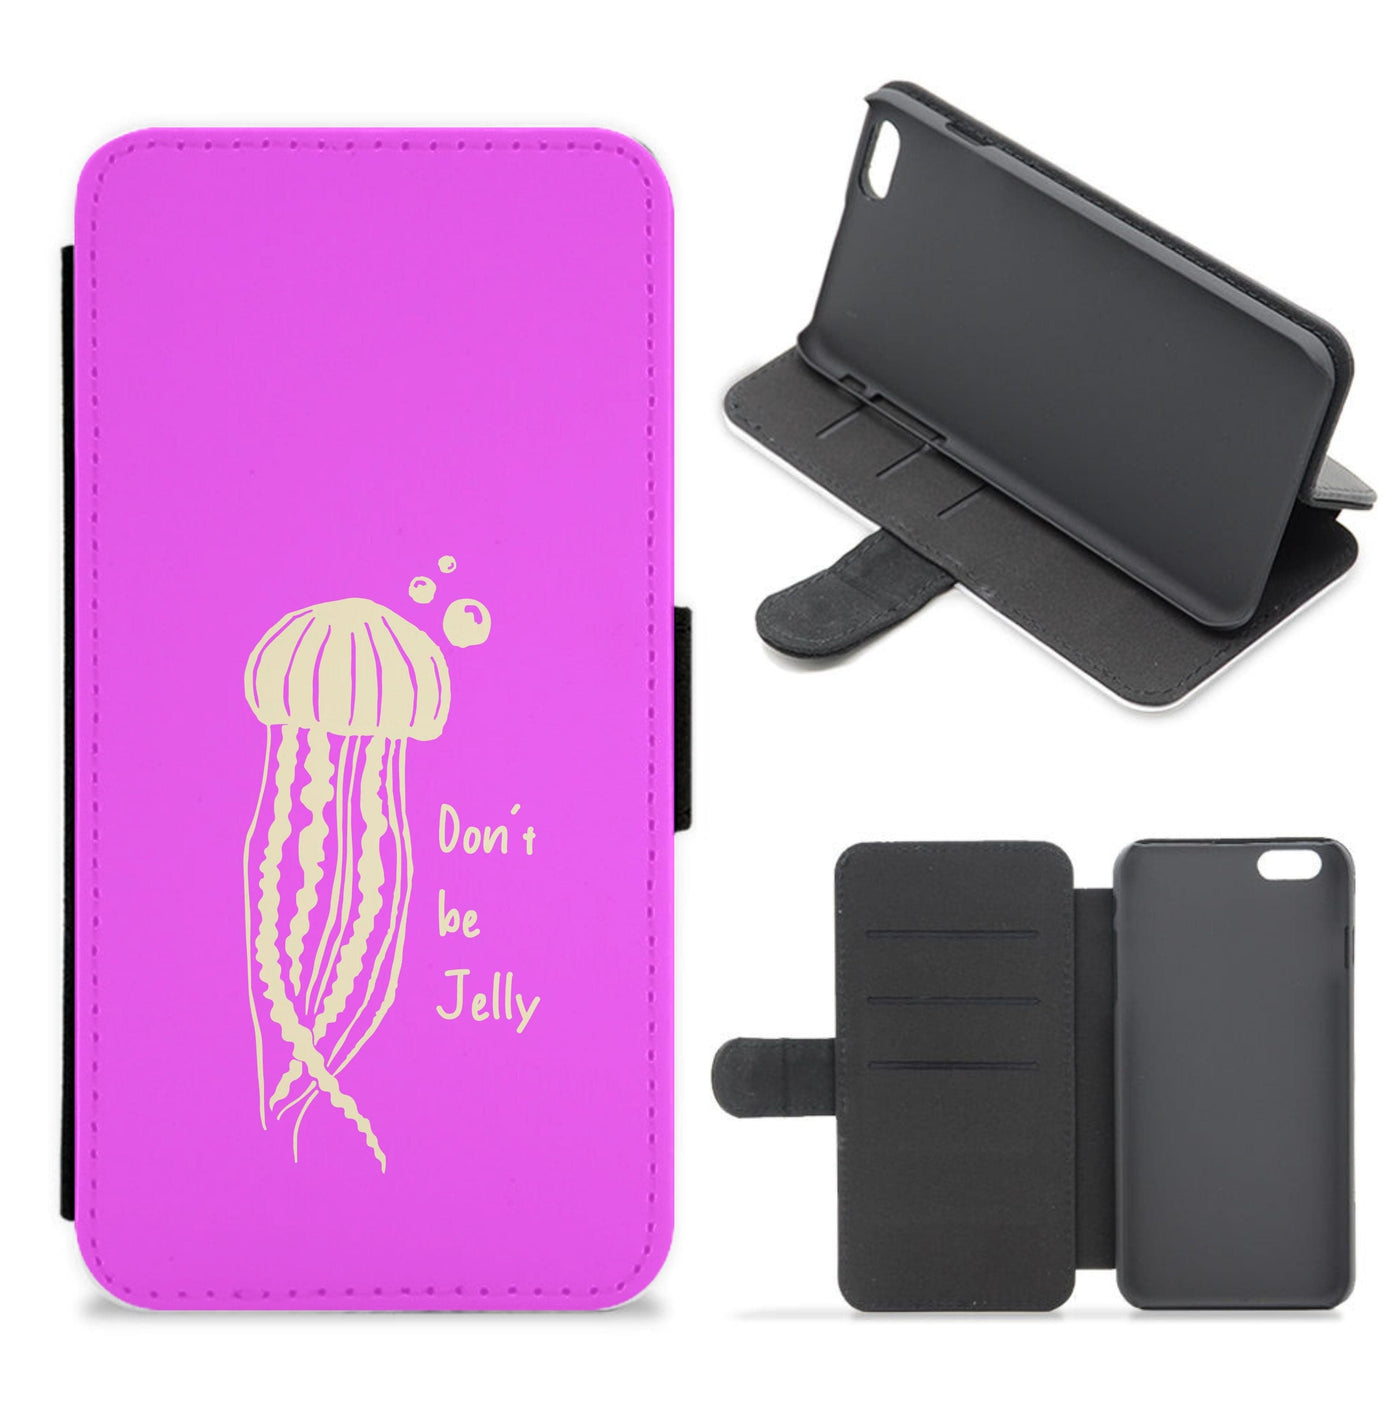 Don't Be Jelly - Sealife Flip / Wallet Phone Case